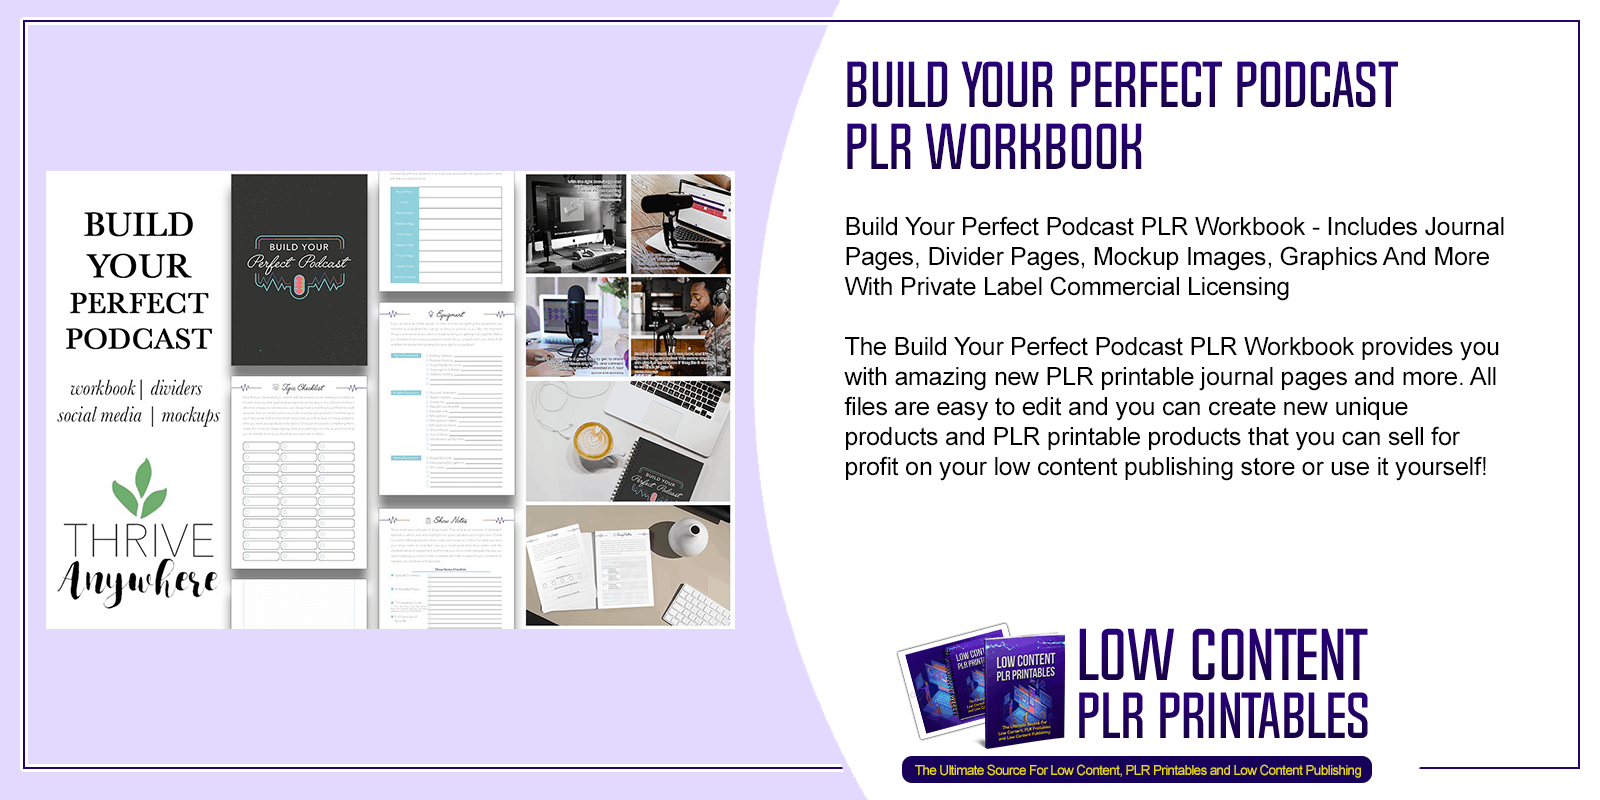 Build Your Perfect Podcast PLR Workbook